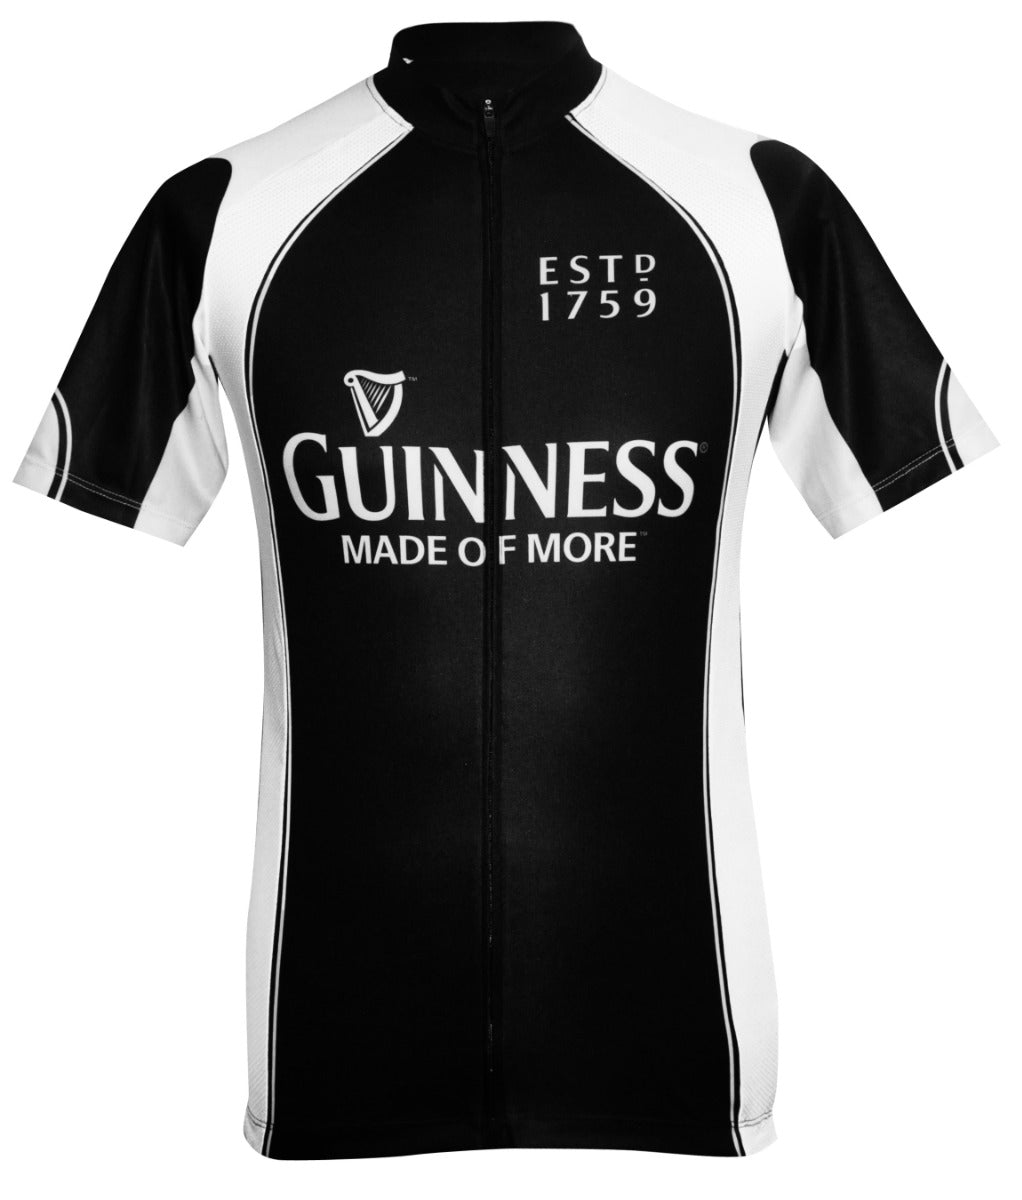 The Guinness Basic Cycling Jersey is a performance-oriented race cut jersey.